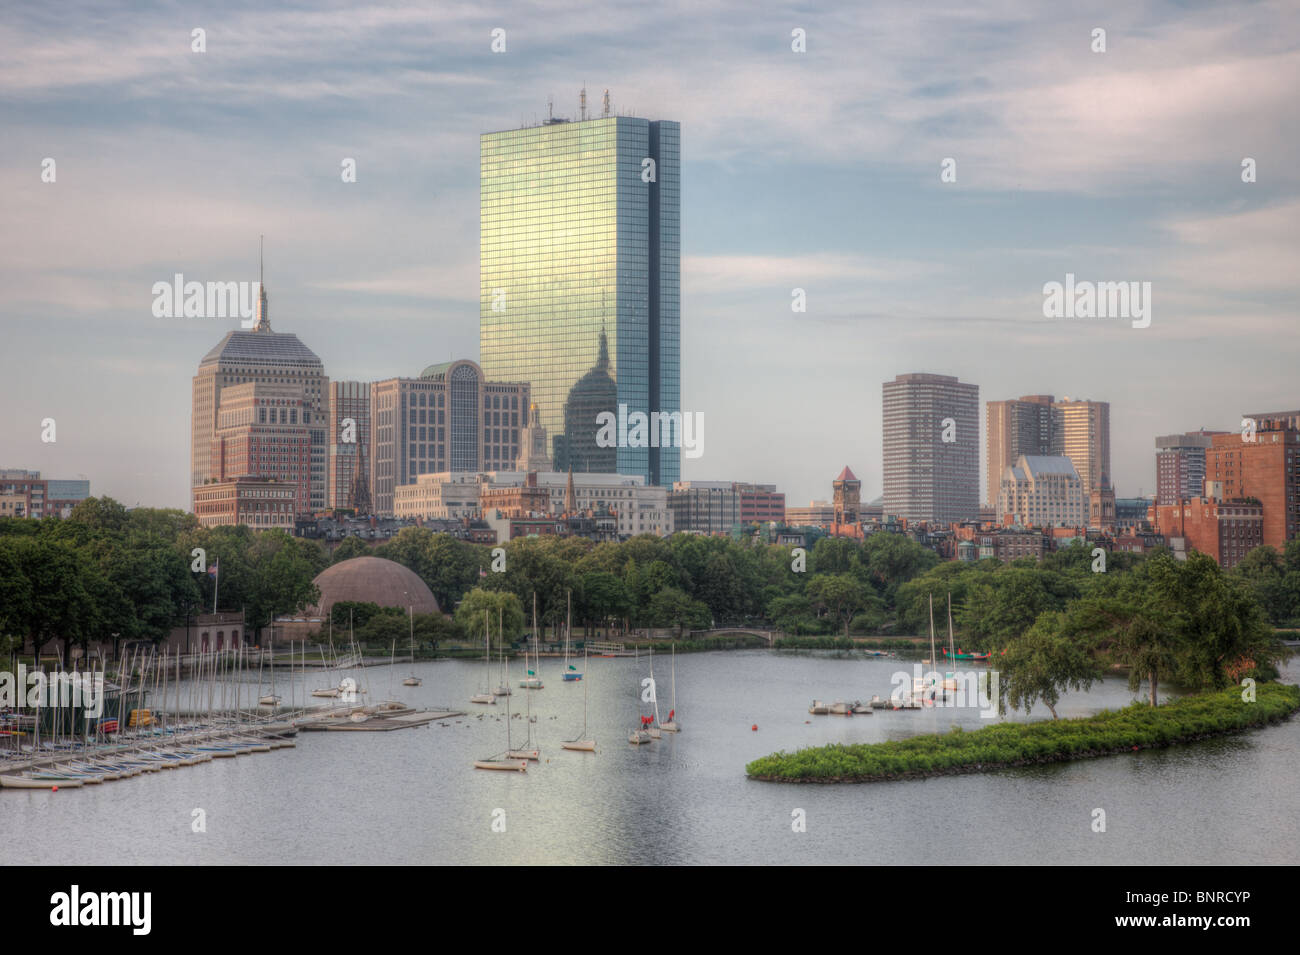 The Boston skyline including the John Hancock building, as seen over the Charles River from the Longfellow Bridge. Stock Photo